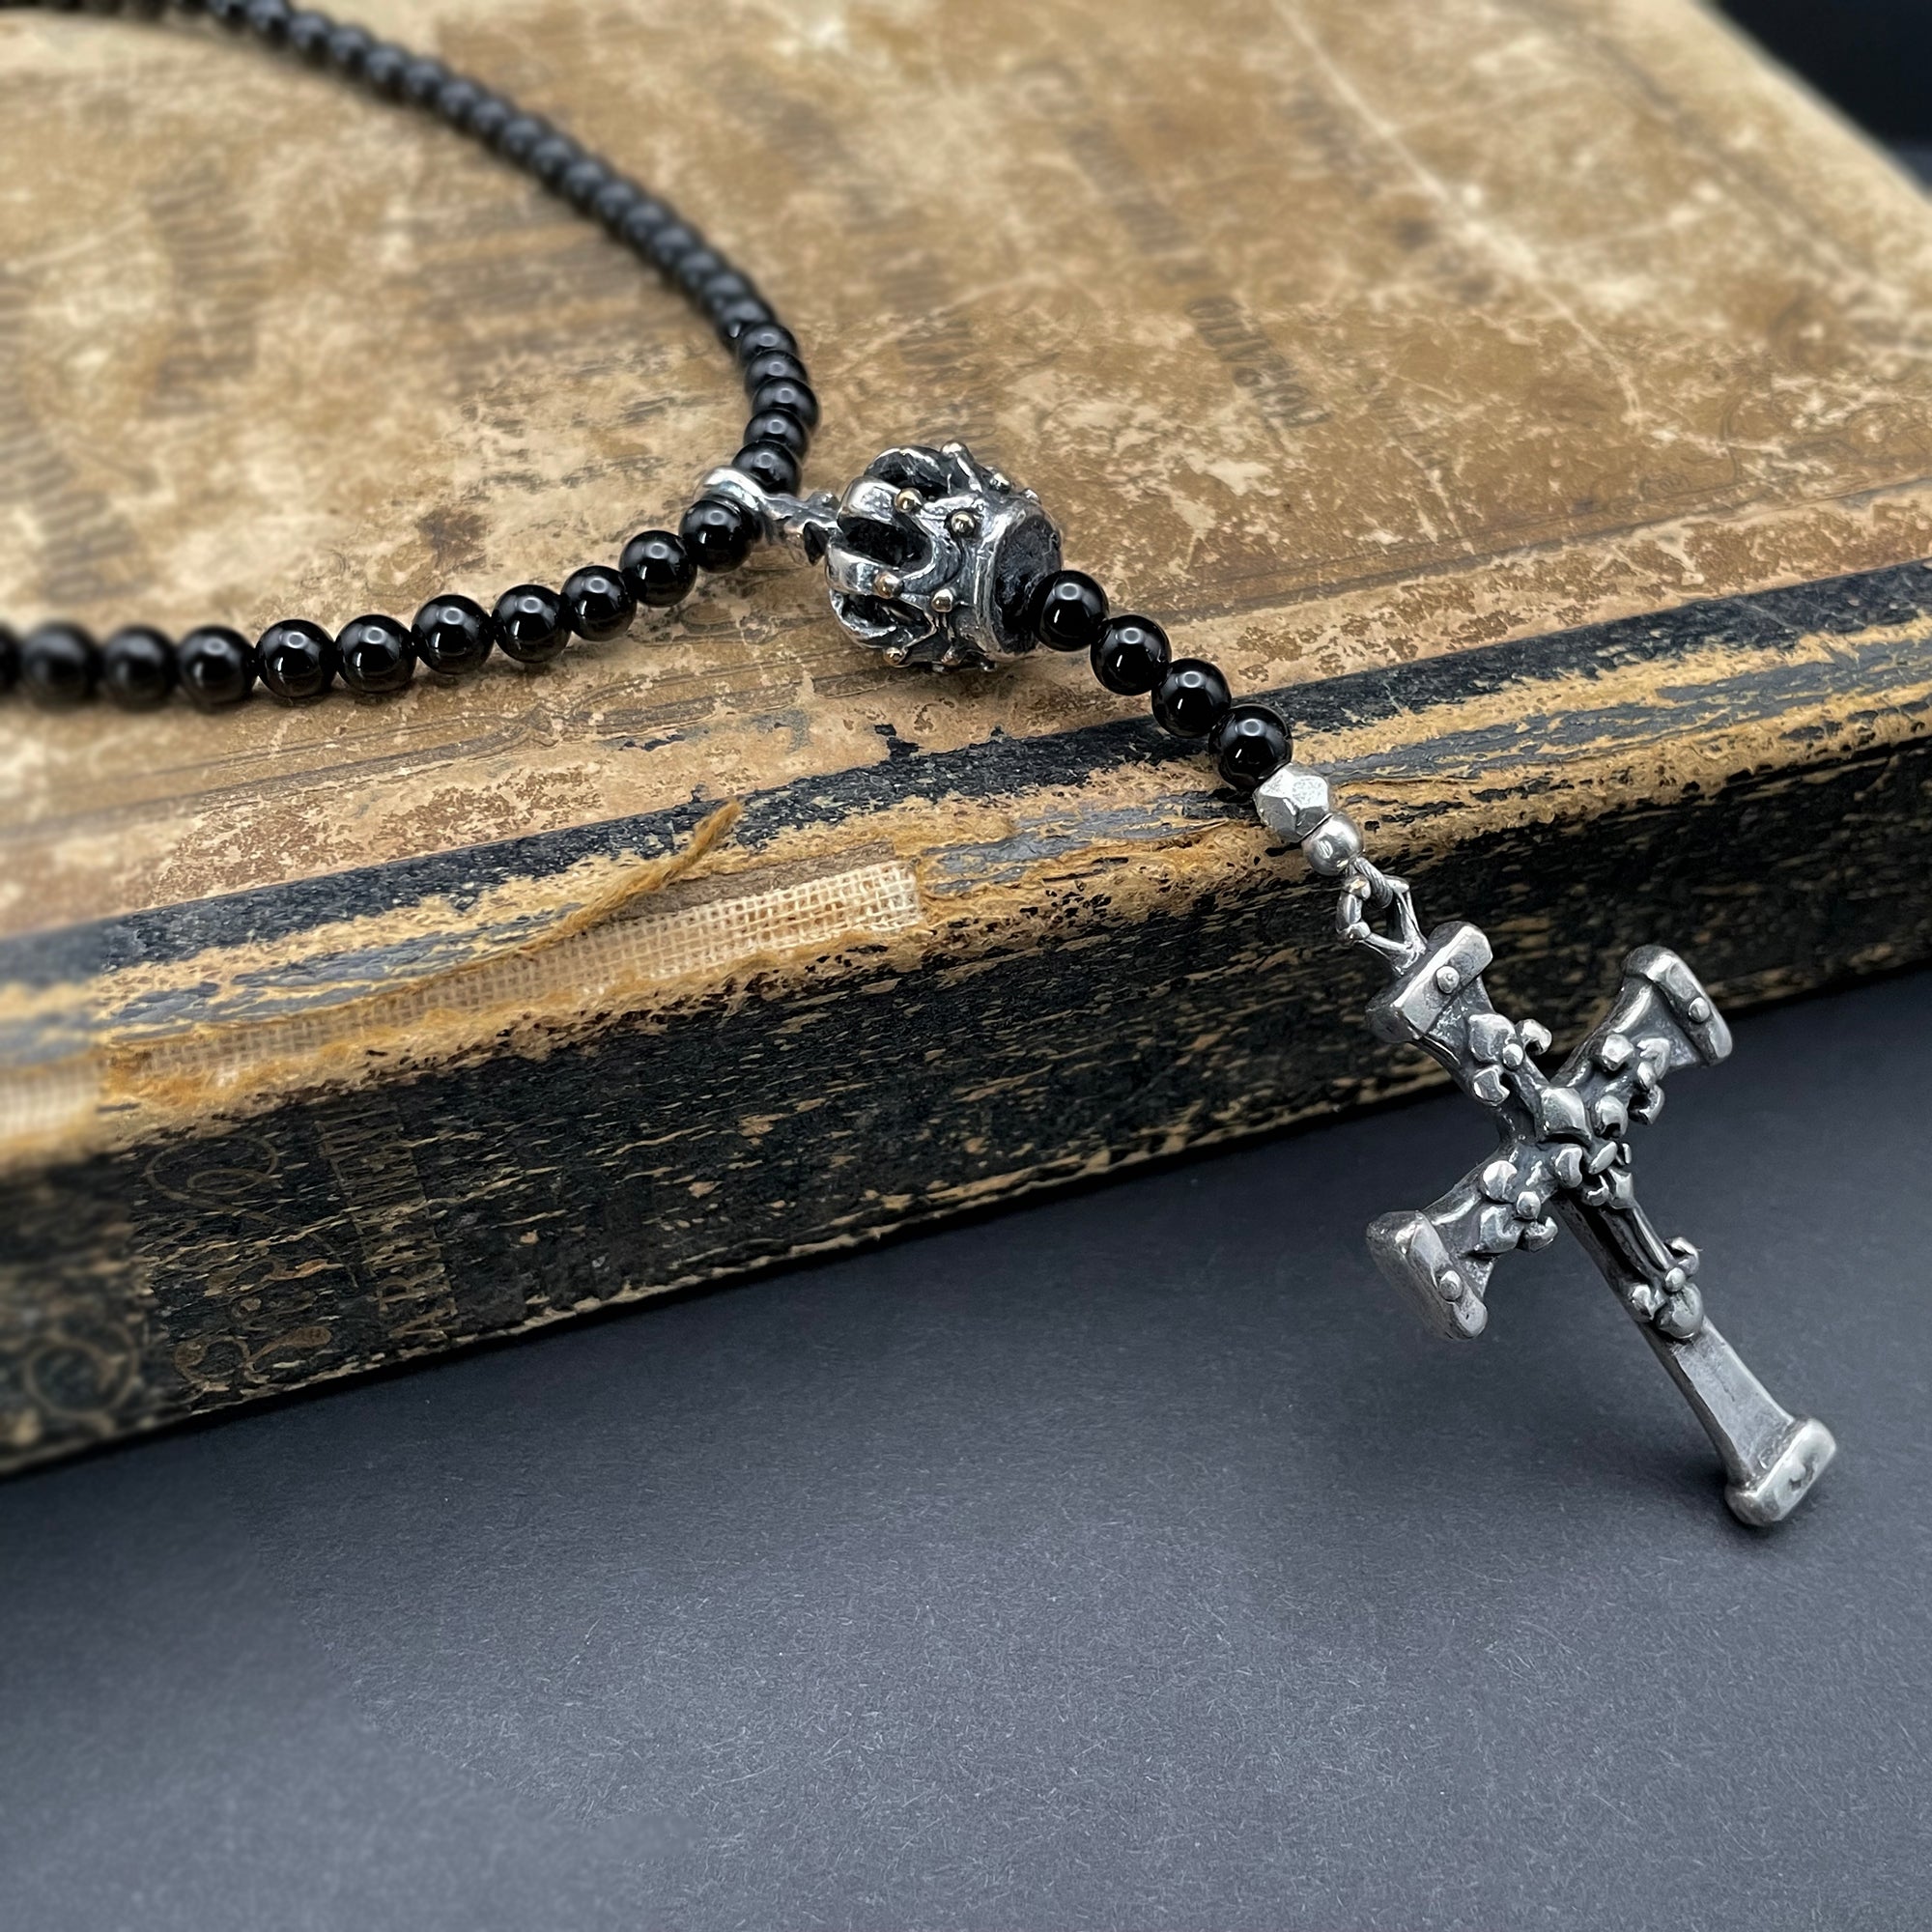 Fleur de Lis Cross and Crown Rosary Necklace for Women by Rock My Wings